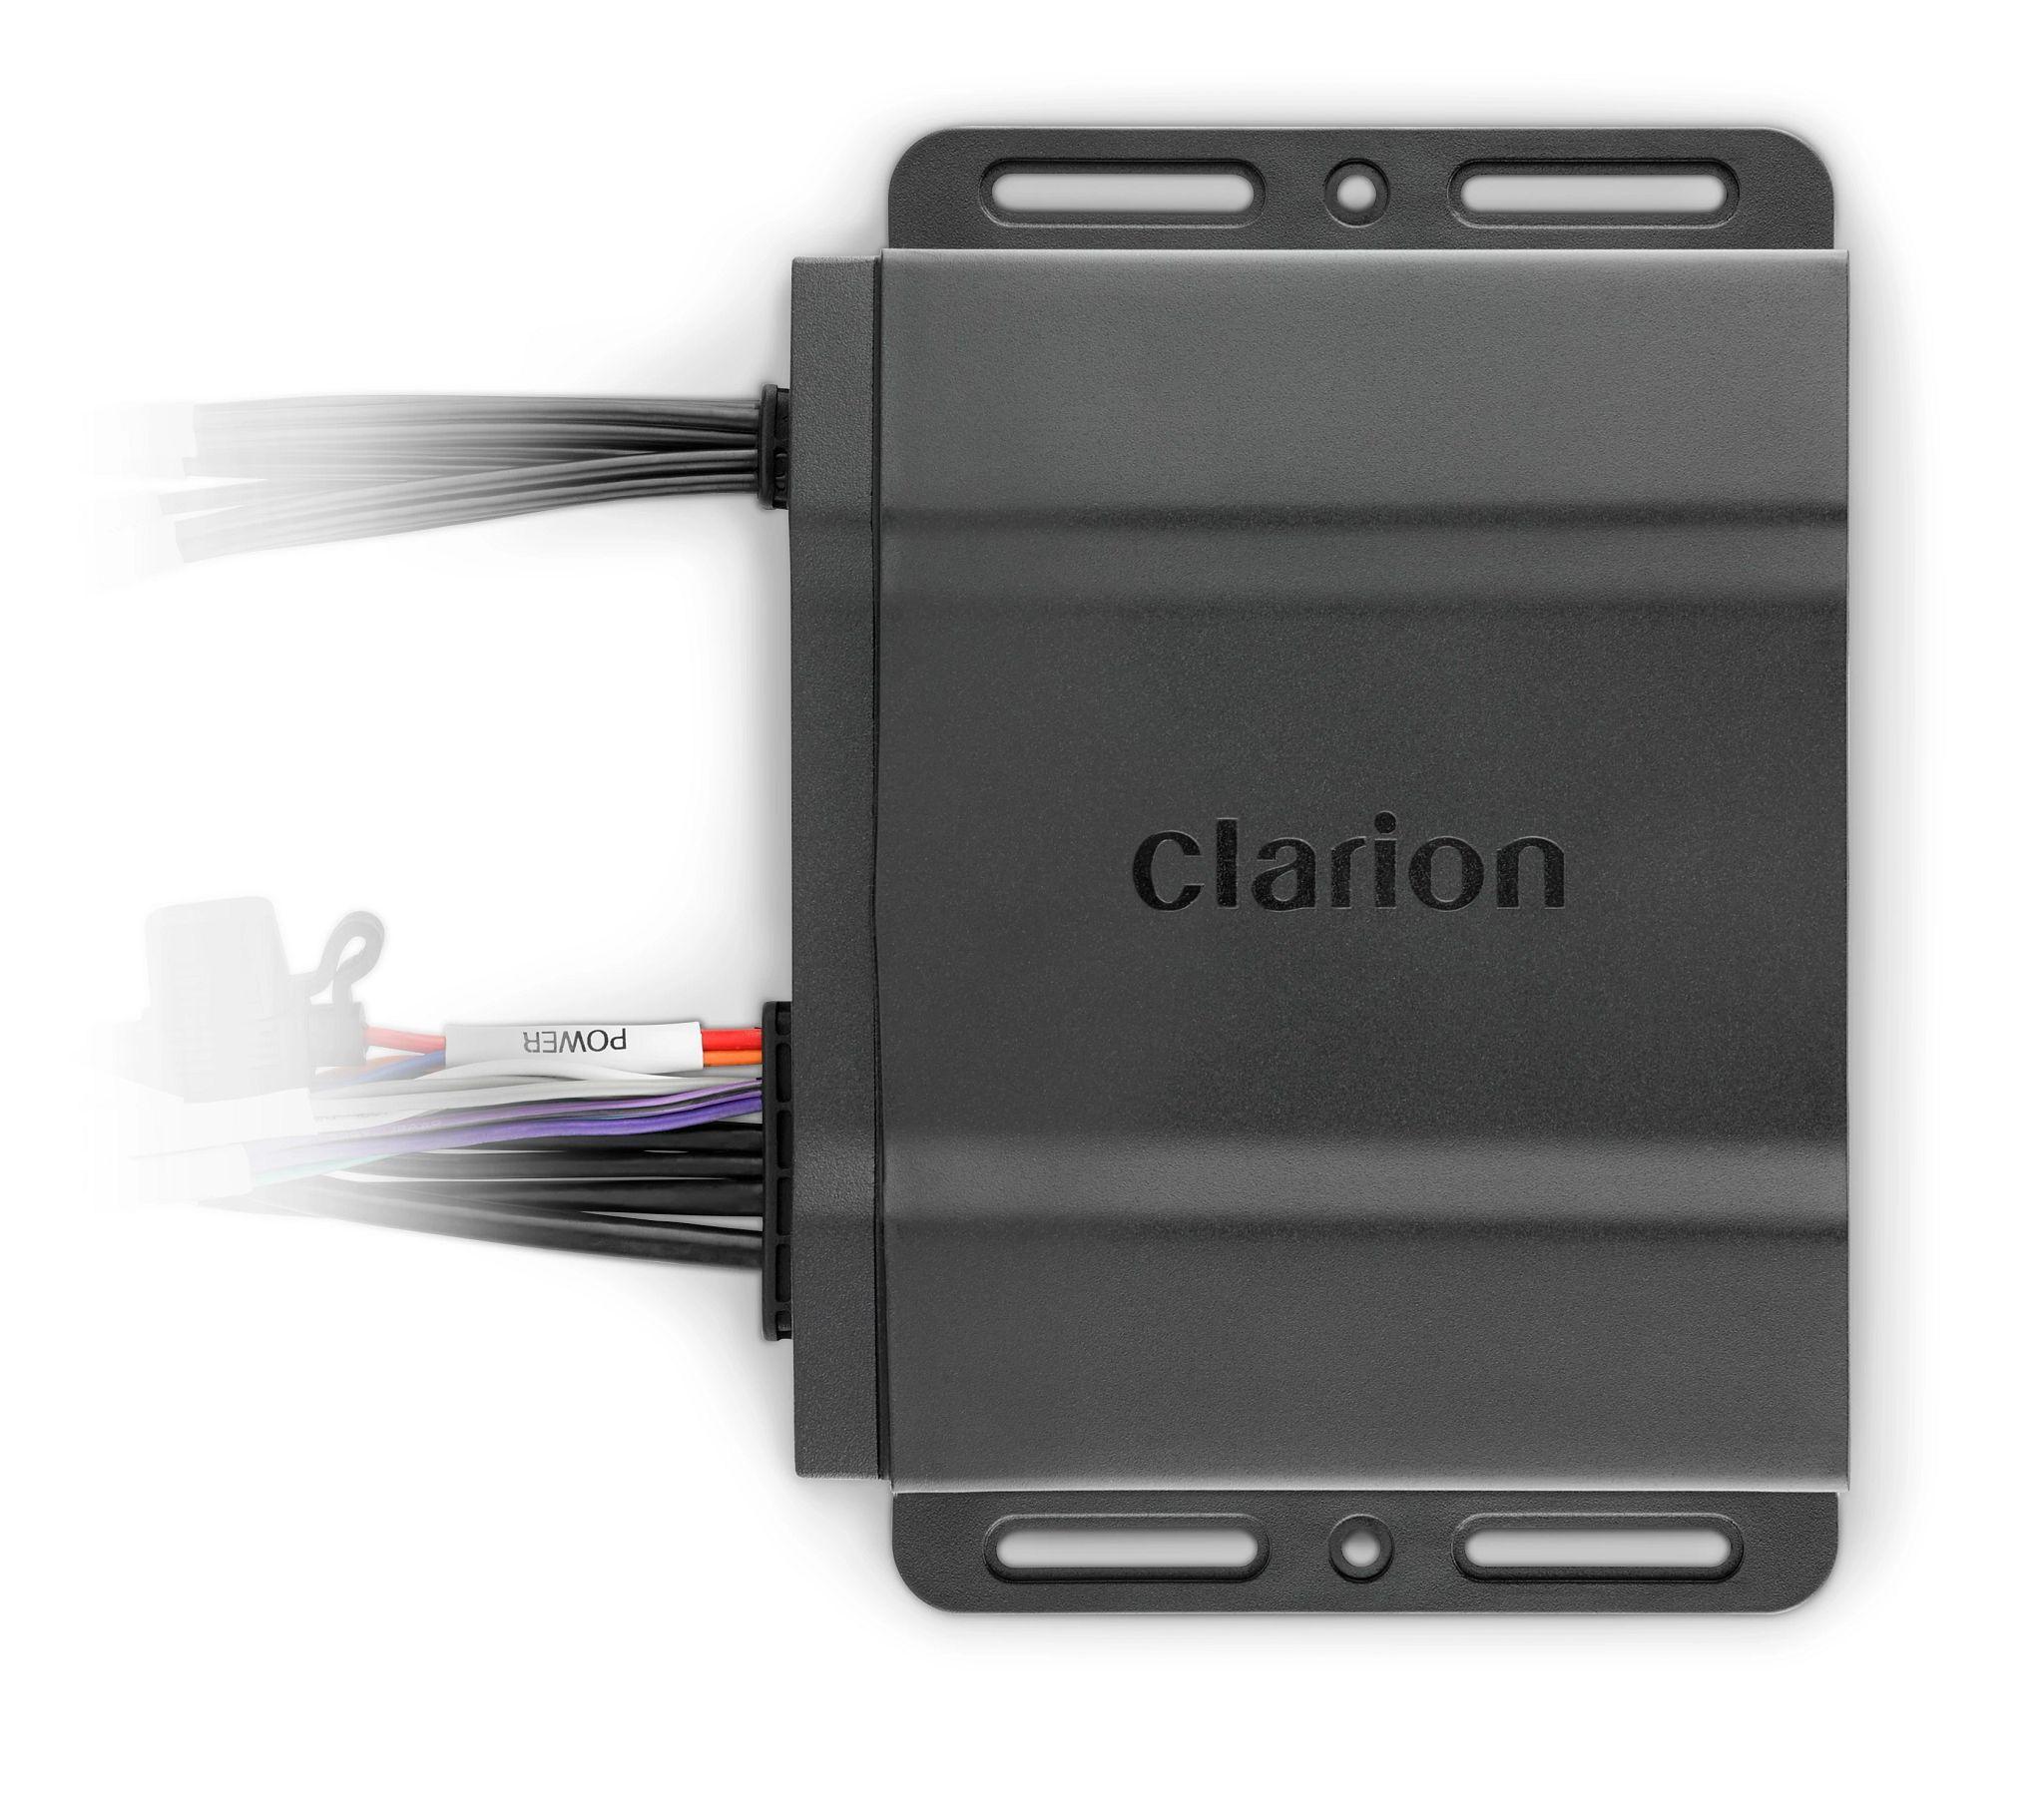 CLARION Hideaway Marine Source Unit for use with NMEA 2000 MFD or CMR Remote. Features: Global AM/FM Tuner, NOAA Weather Radio, *SiriusXM-Ready, Bluetooth 5.0, USB 2.0 (2.1A charging), Aux Input, Buil